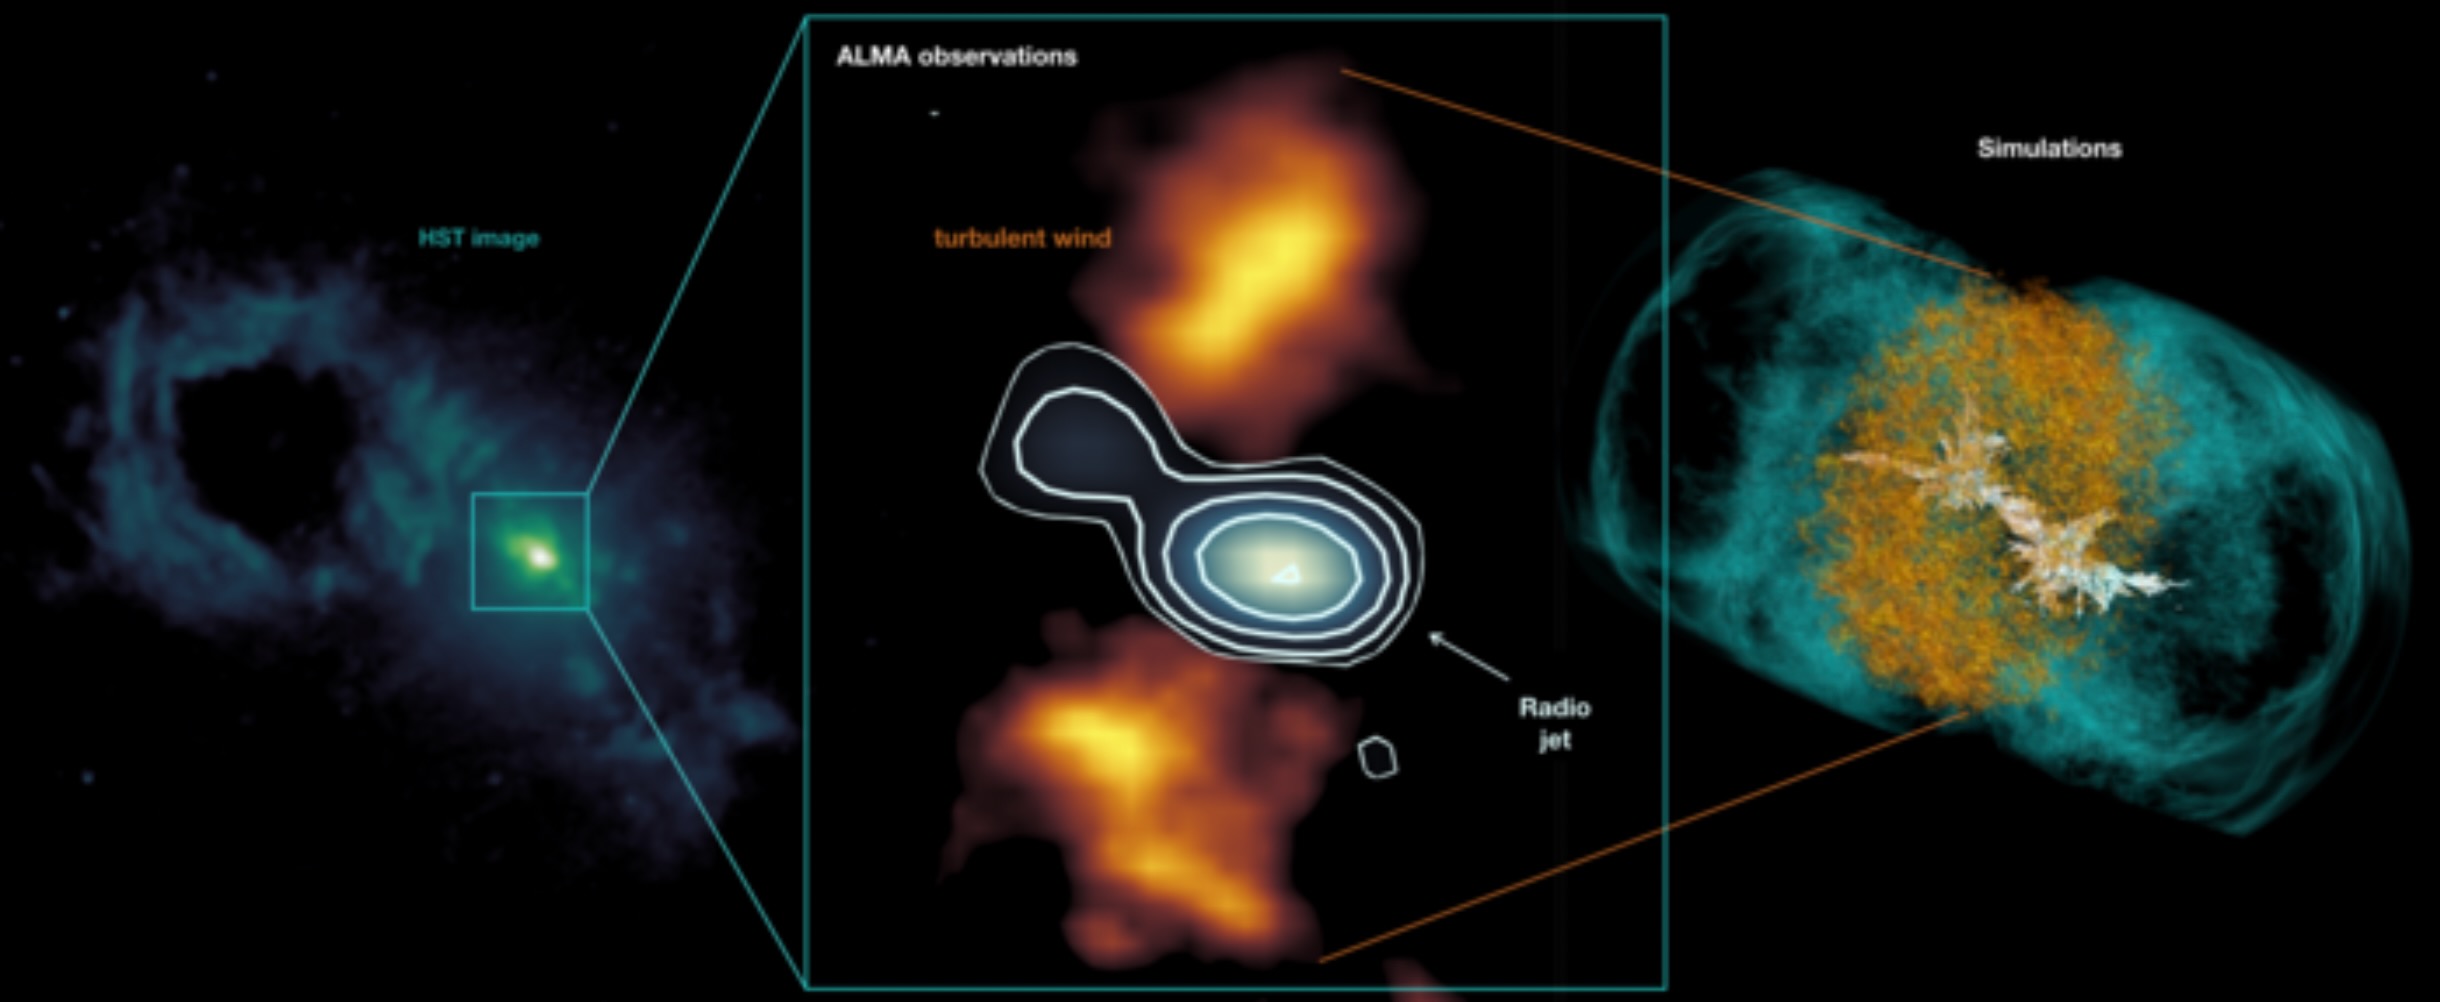 Relativistic Jets and their Impact on Star Formation